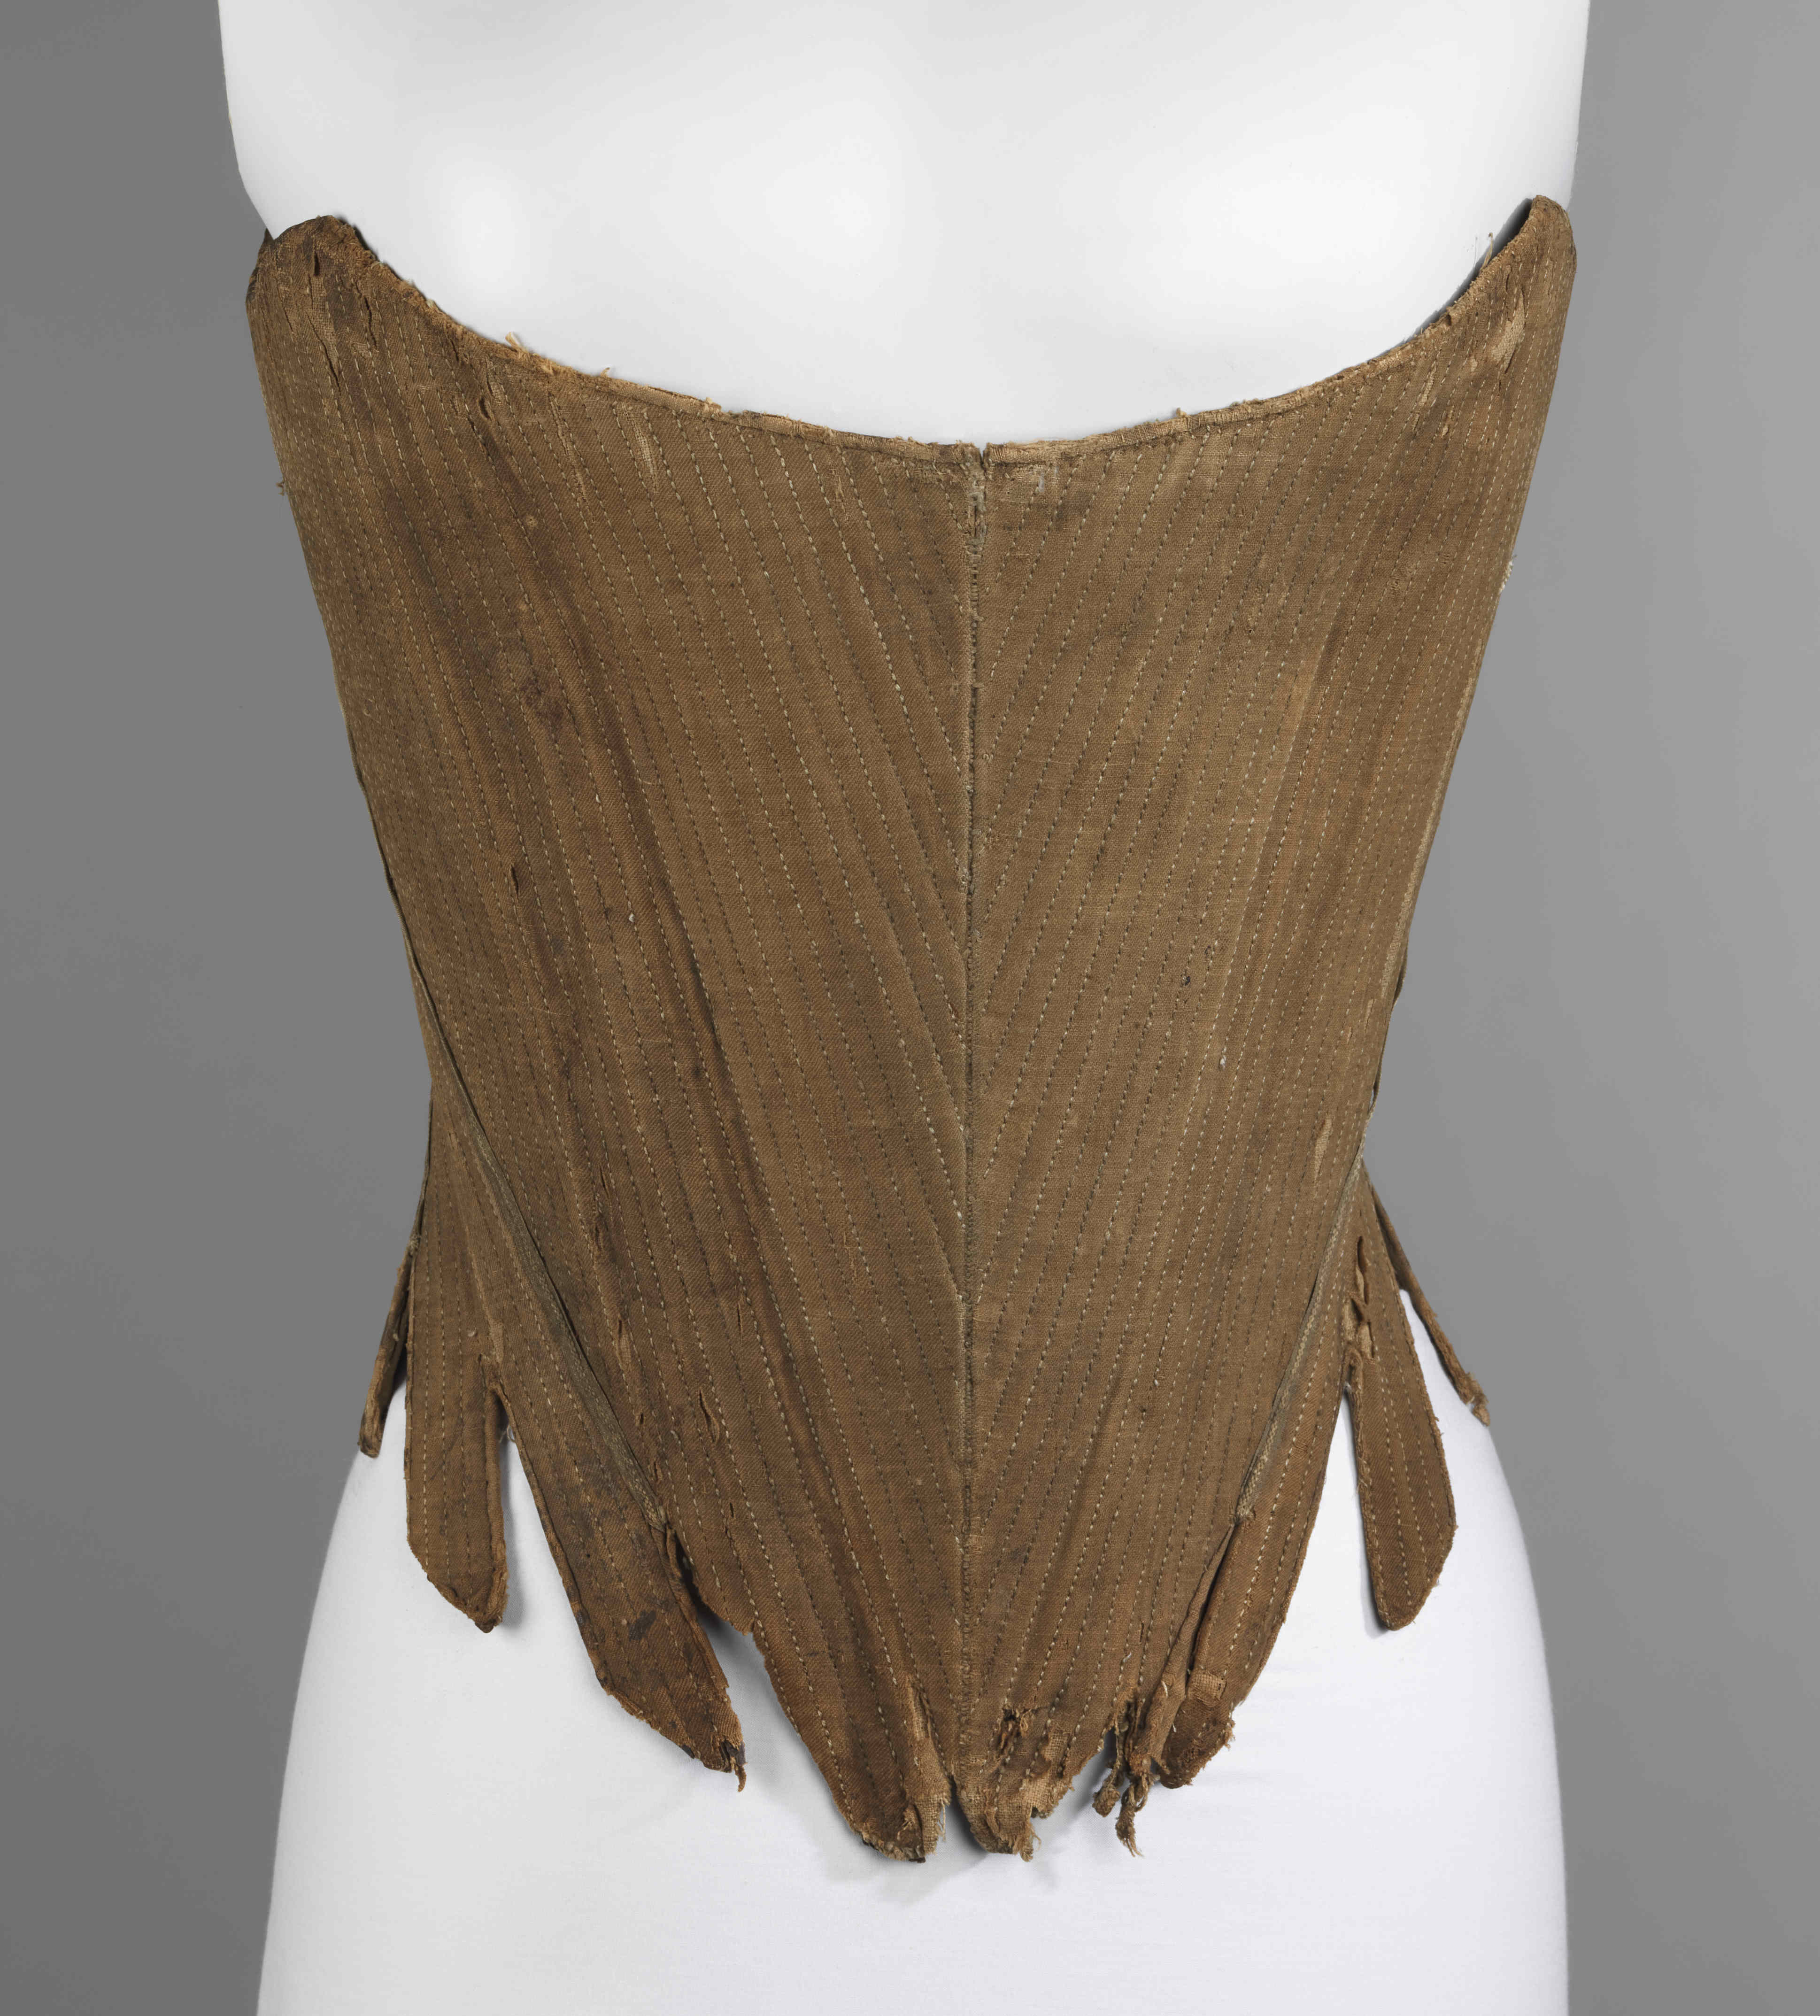 Whalebone corset, known as a pair of stays - Unknown / Inconnu